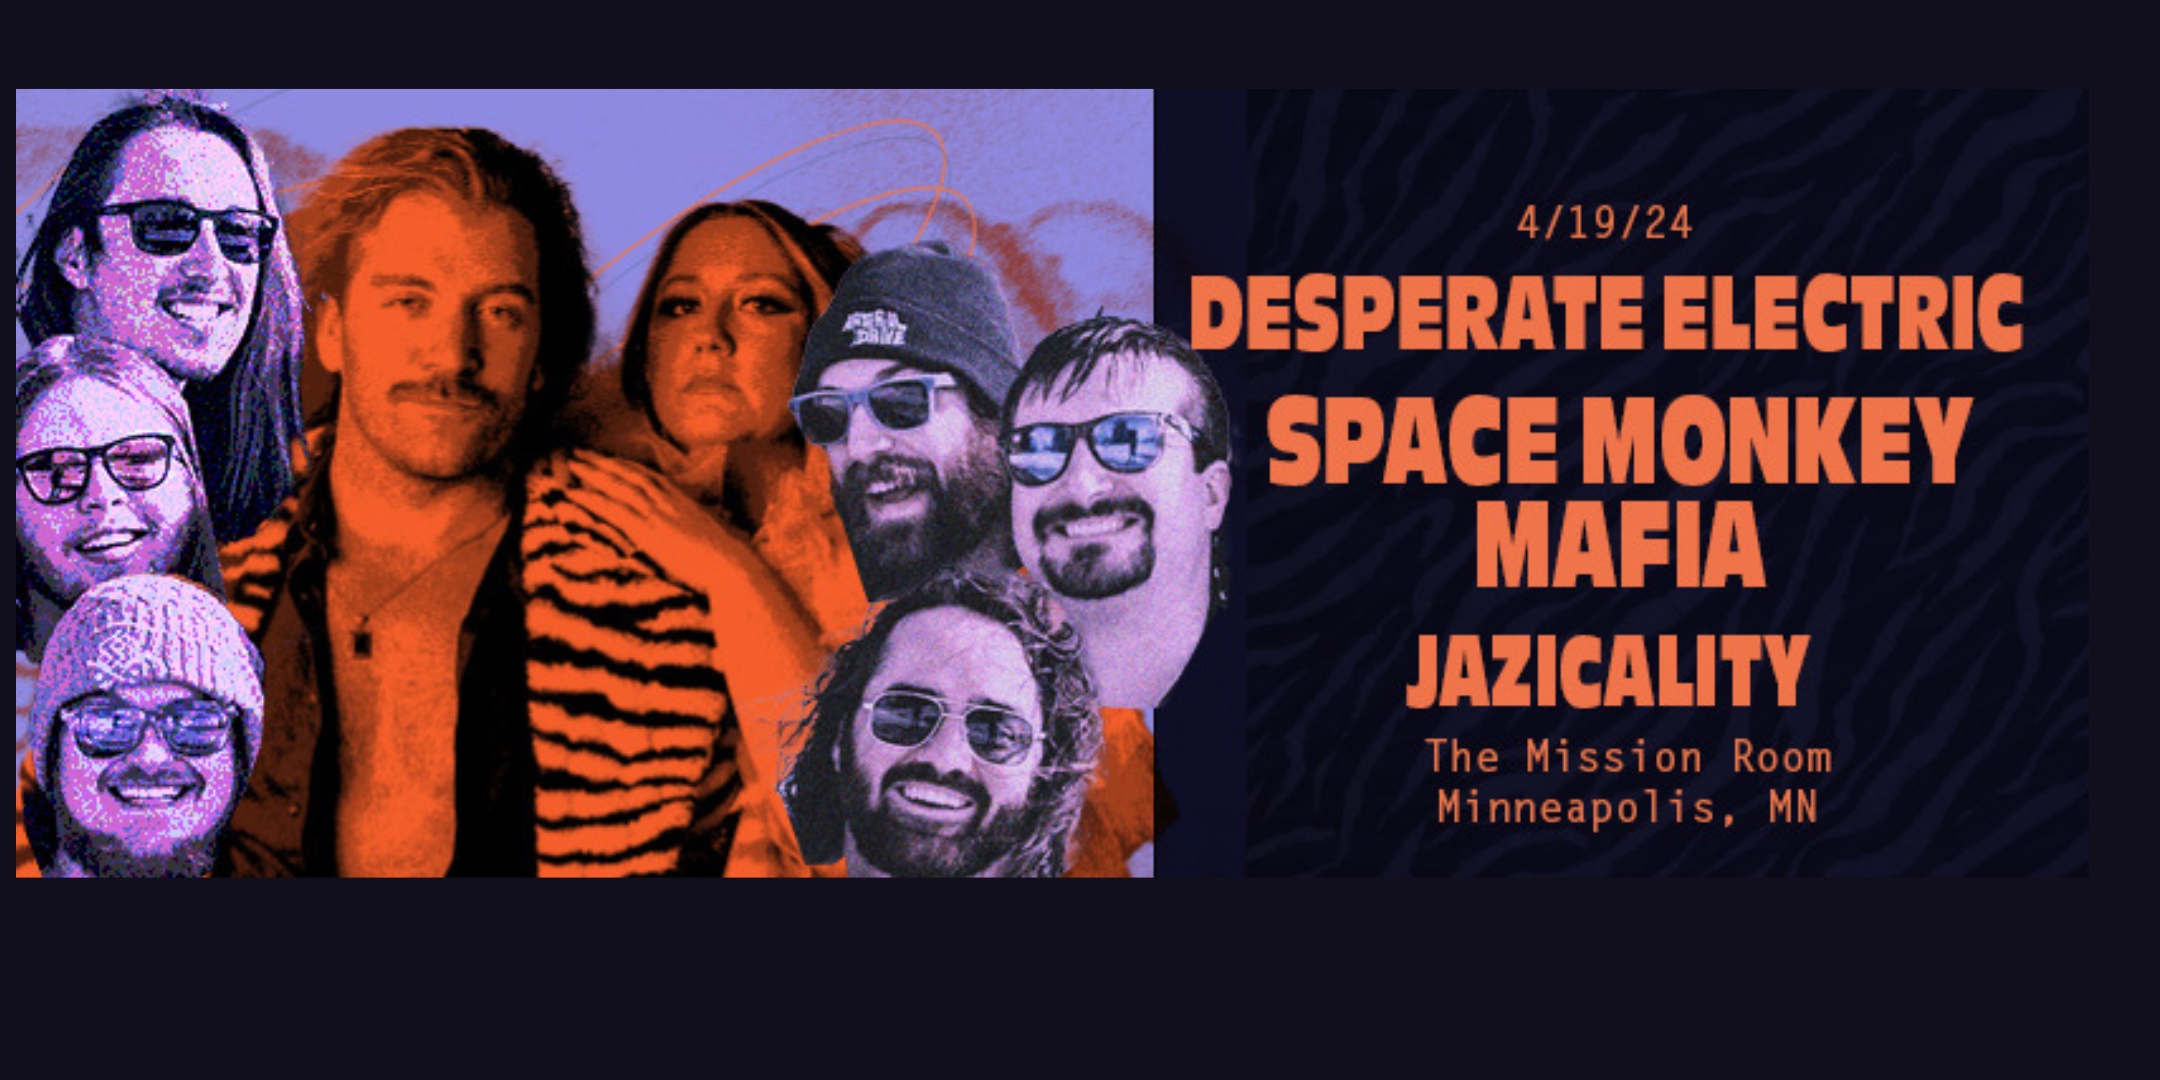 Desperate Electric Space Monkey Mafia Jazicality Friday, April 19 The Hook and Ladder Mission Room Doors 8:30pm :: Music 9:00pm :: 21+ General Admission: $10 ADV / $15 DOS